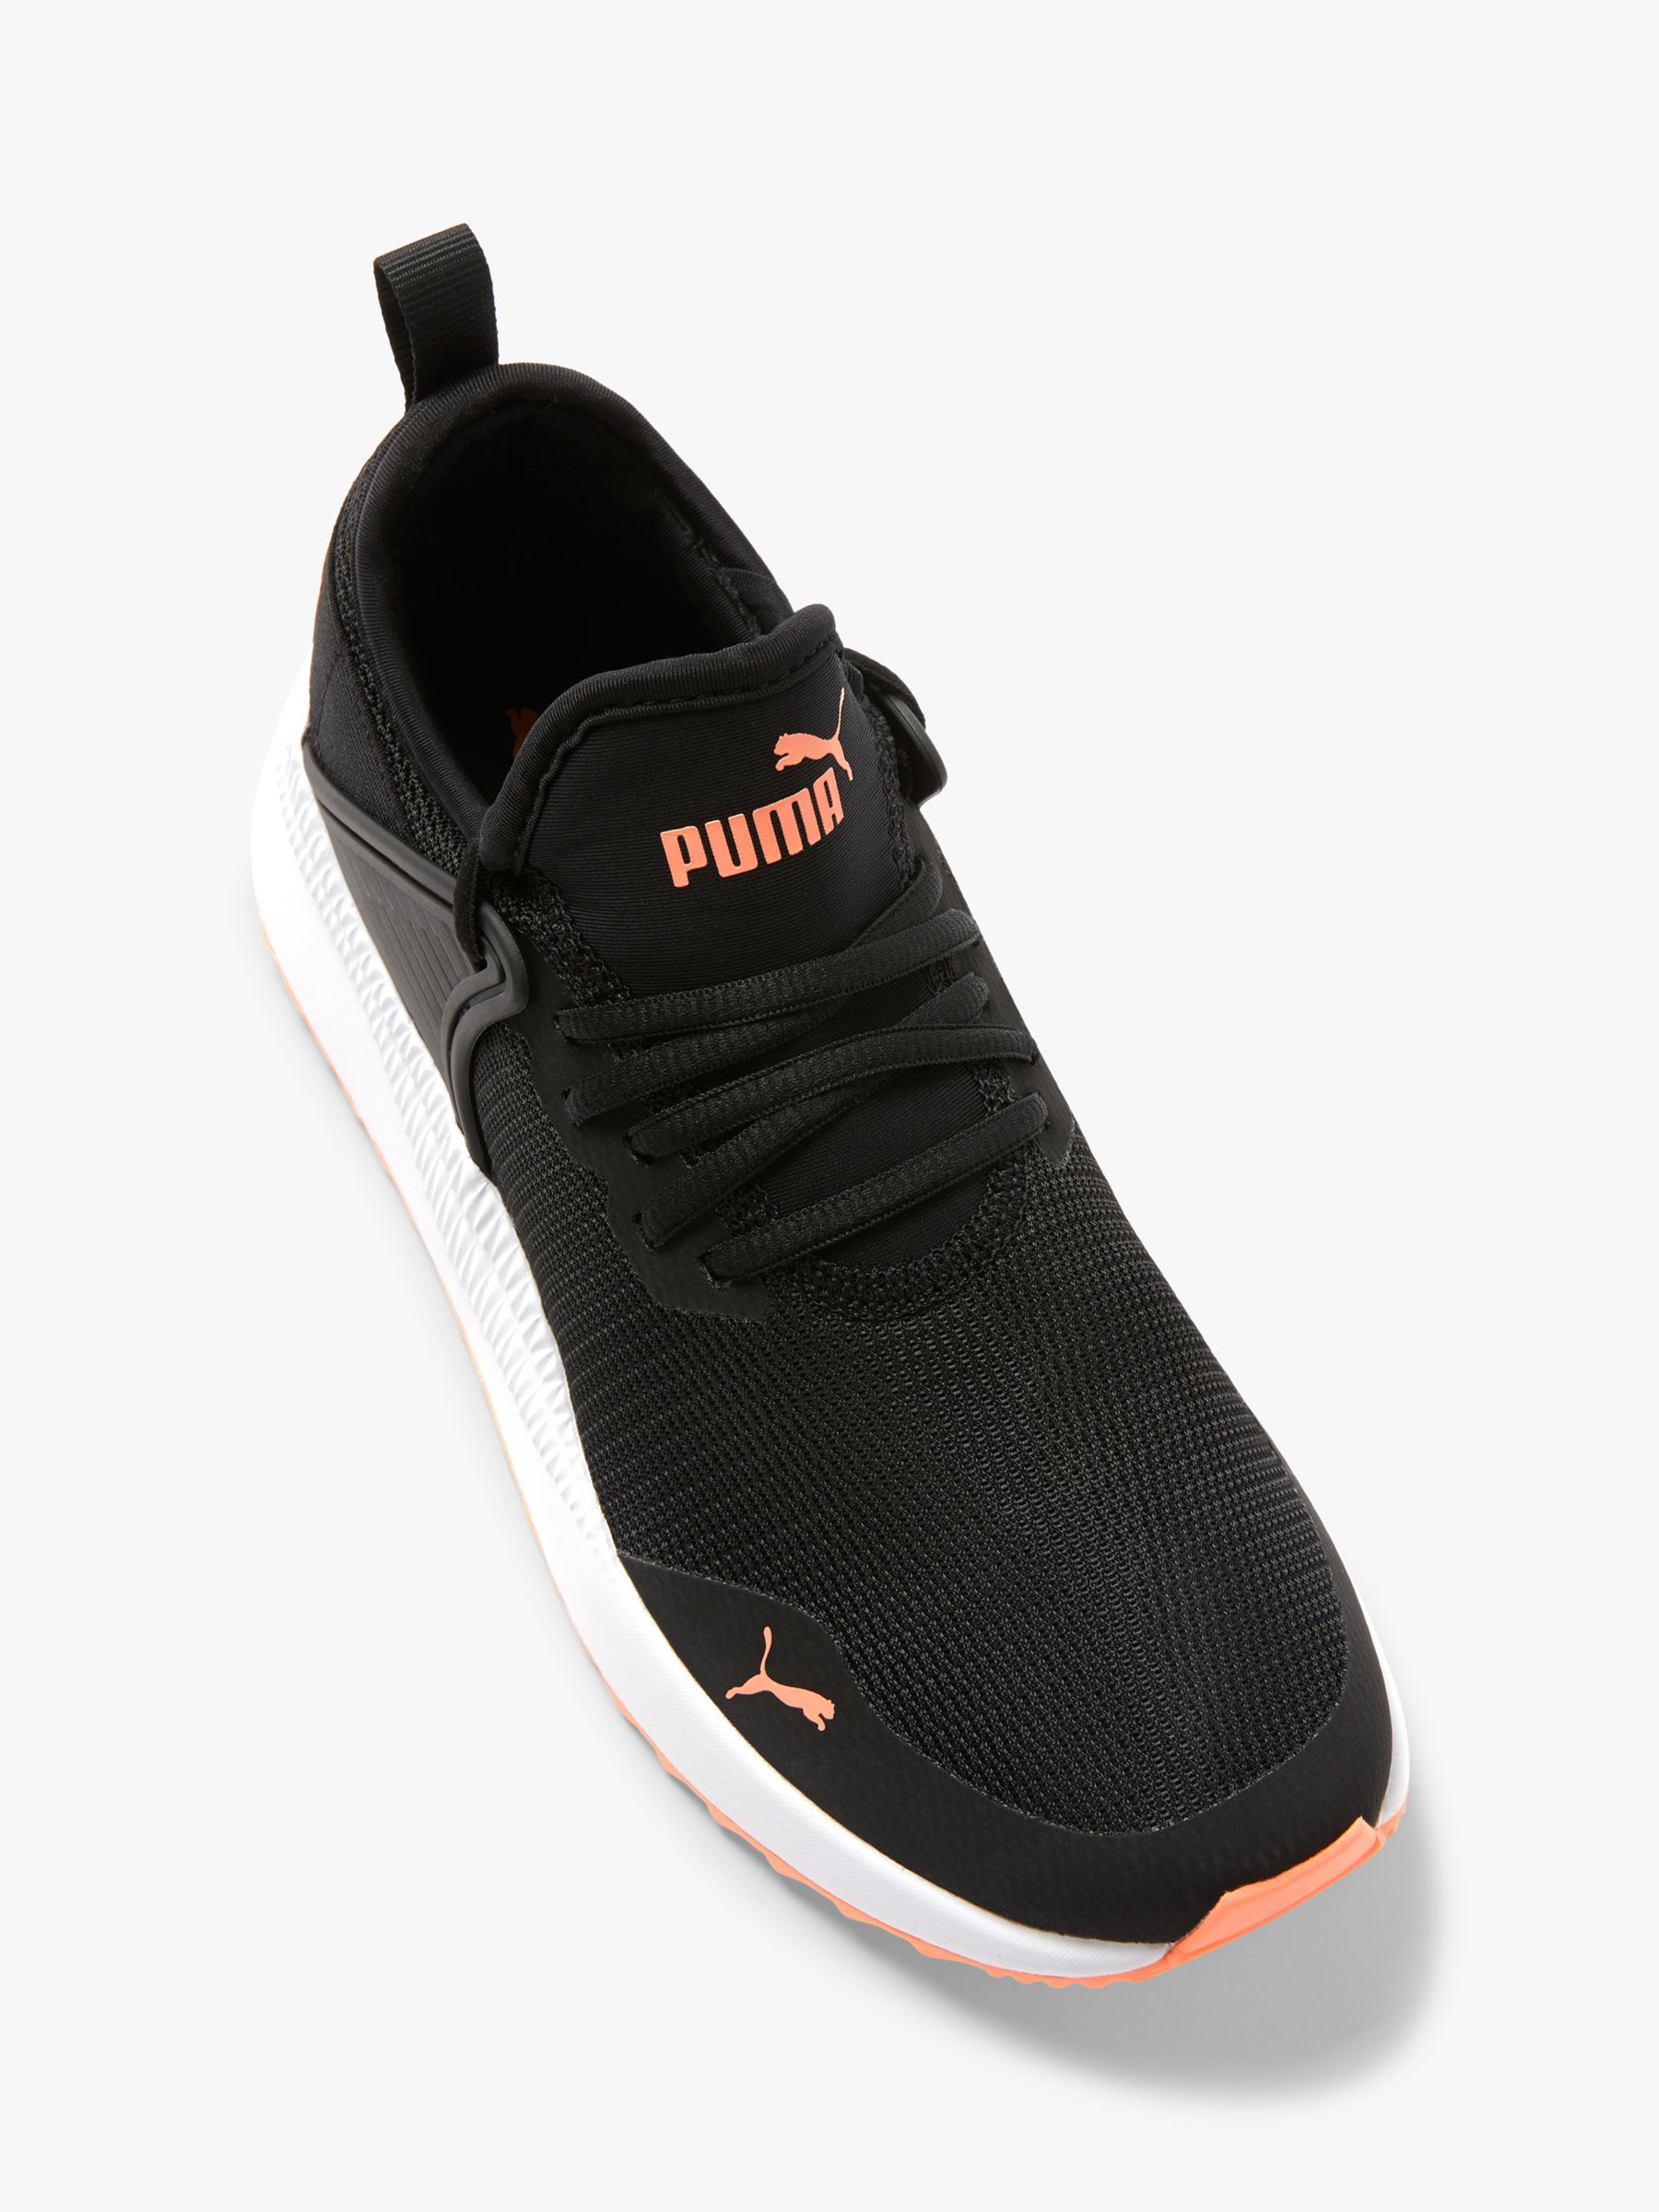 PUMA Pacer Next Cage Women's Trainers, Black